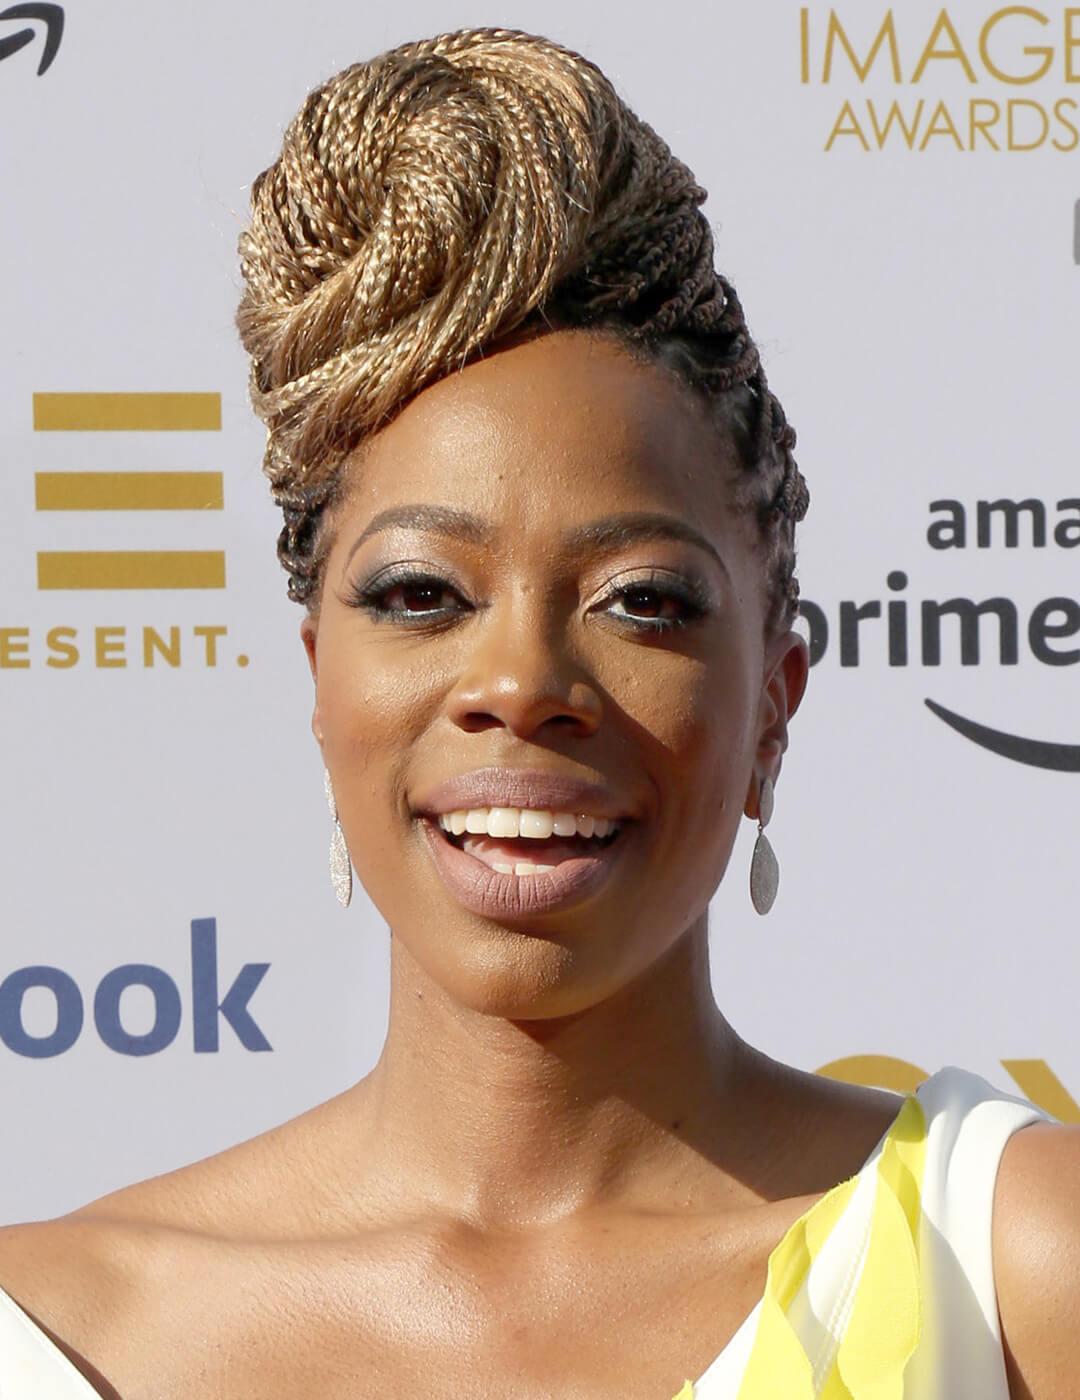 Yvonne Orji rocking a yellow and white dress and braided spiral bun hairstyle